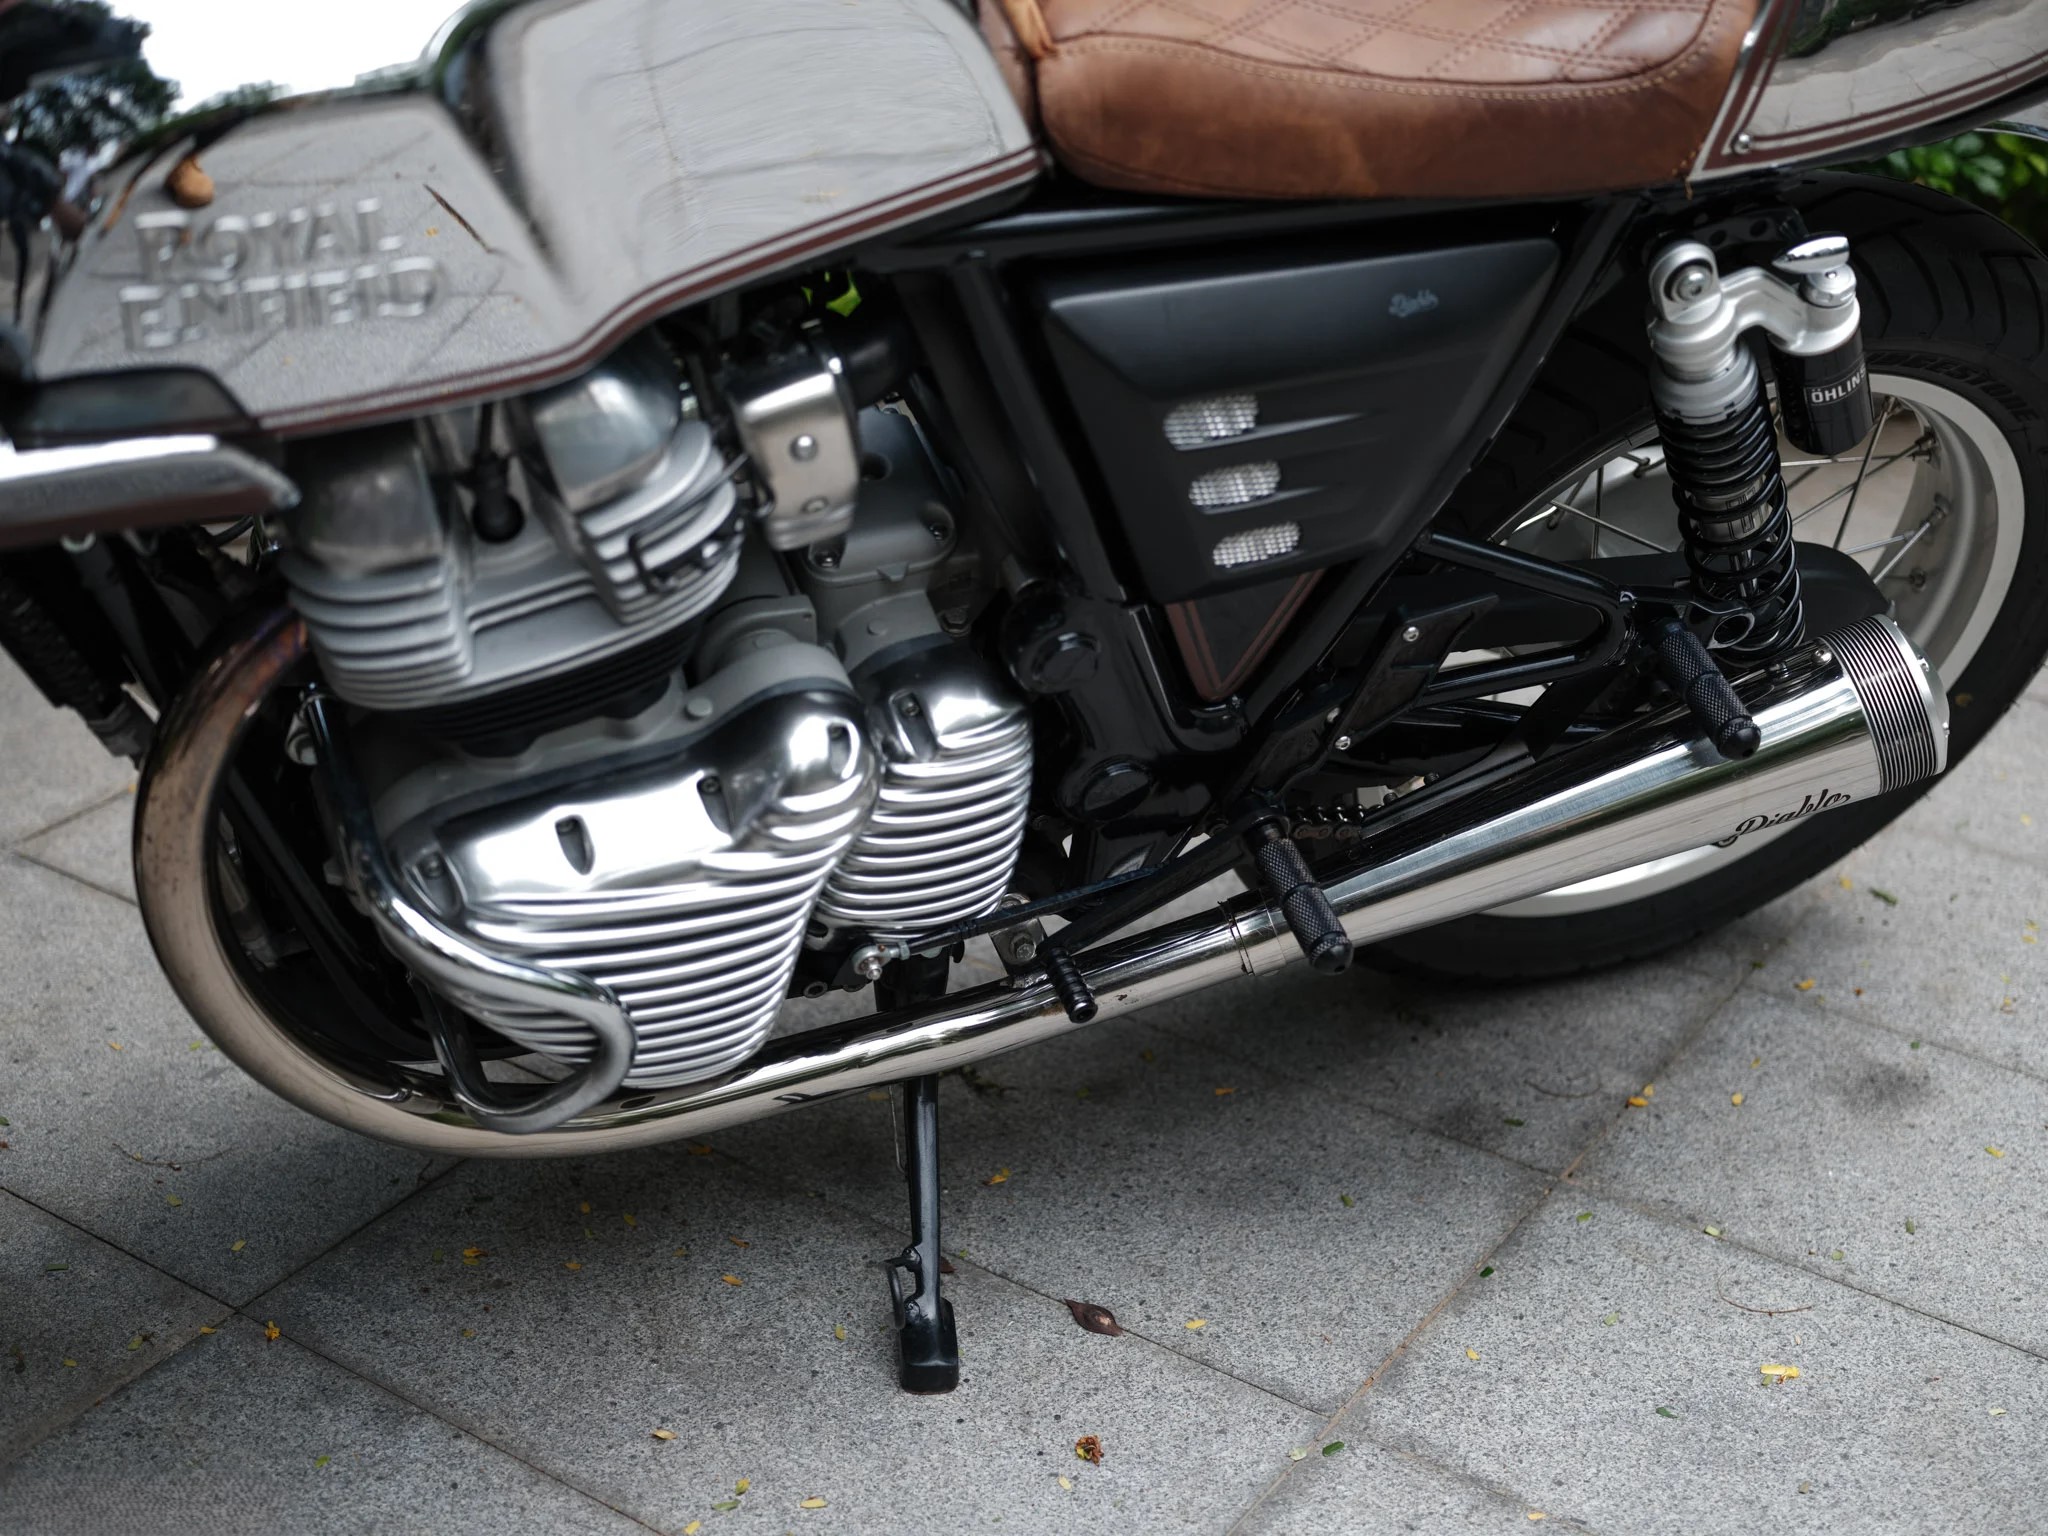 Continental GT 650 15